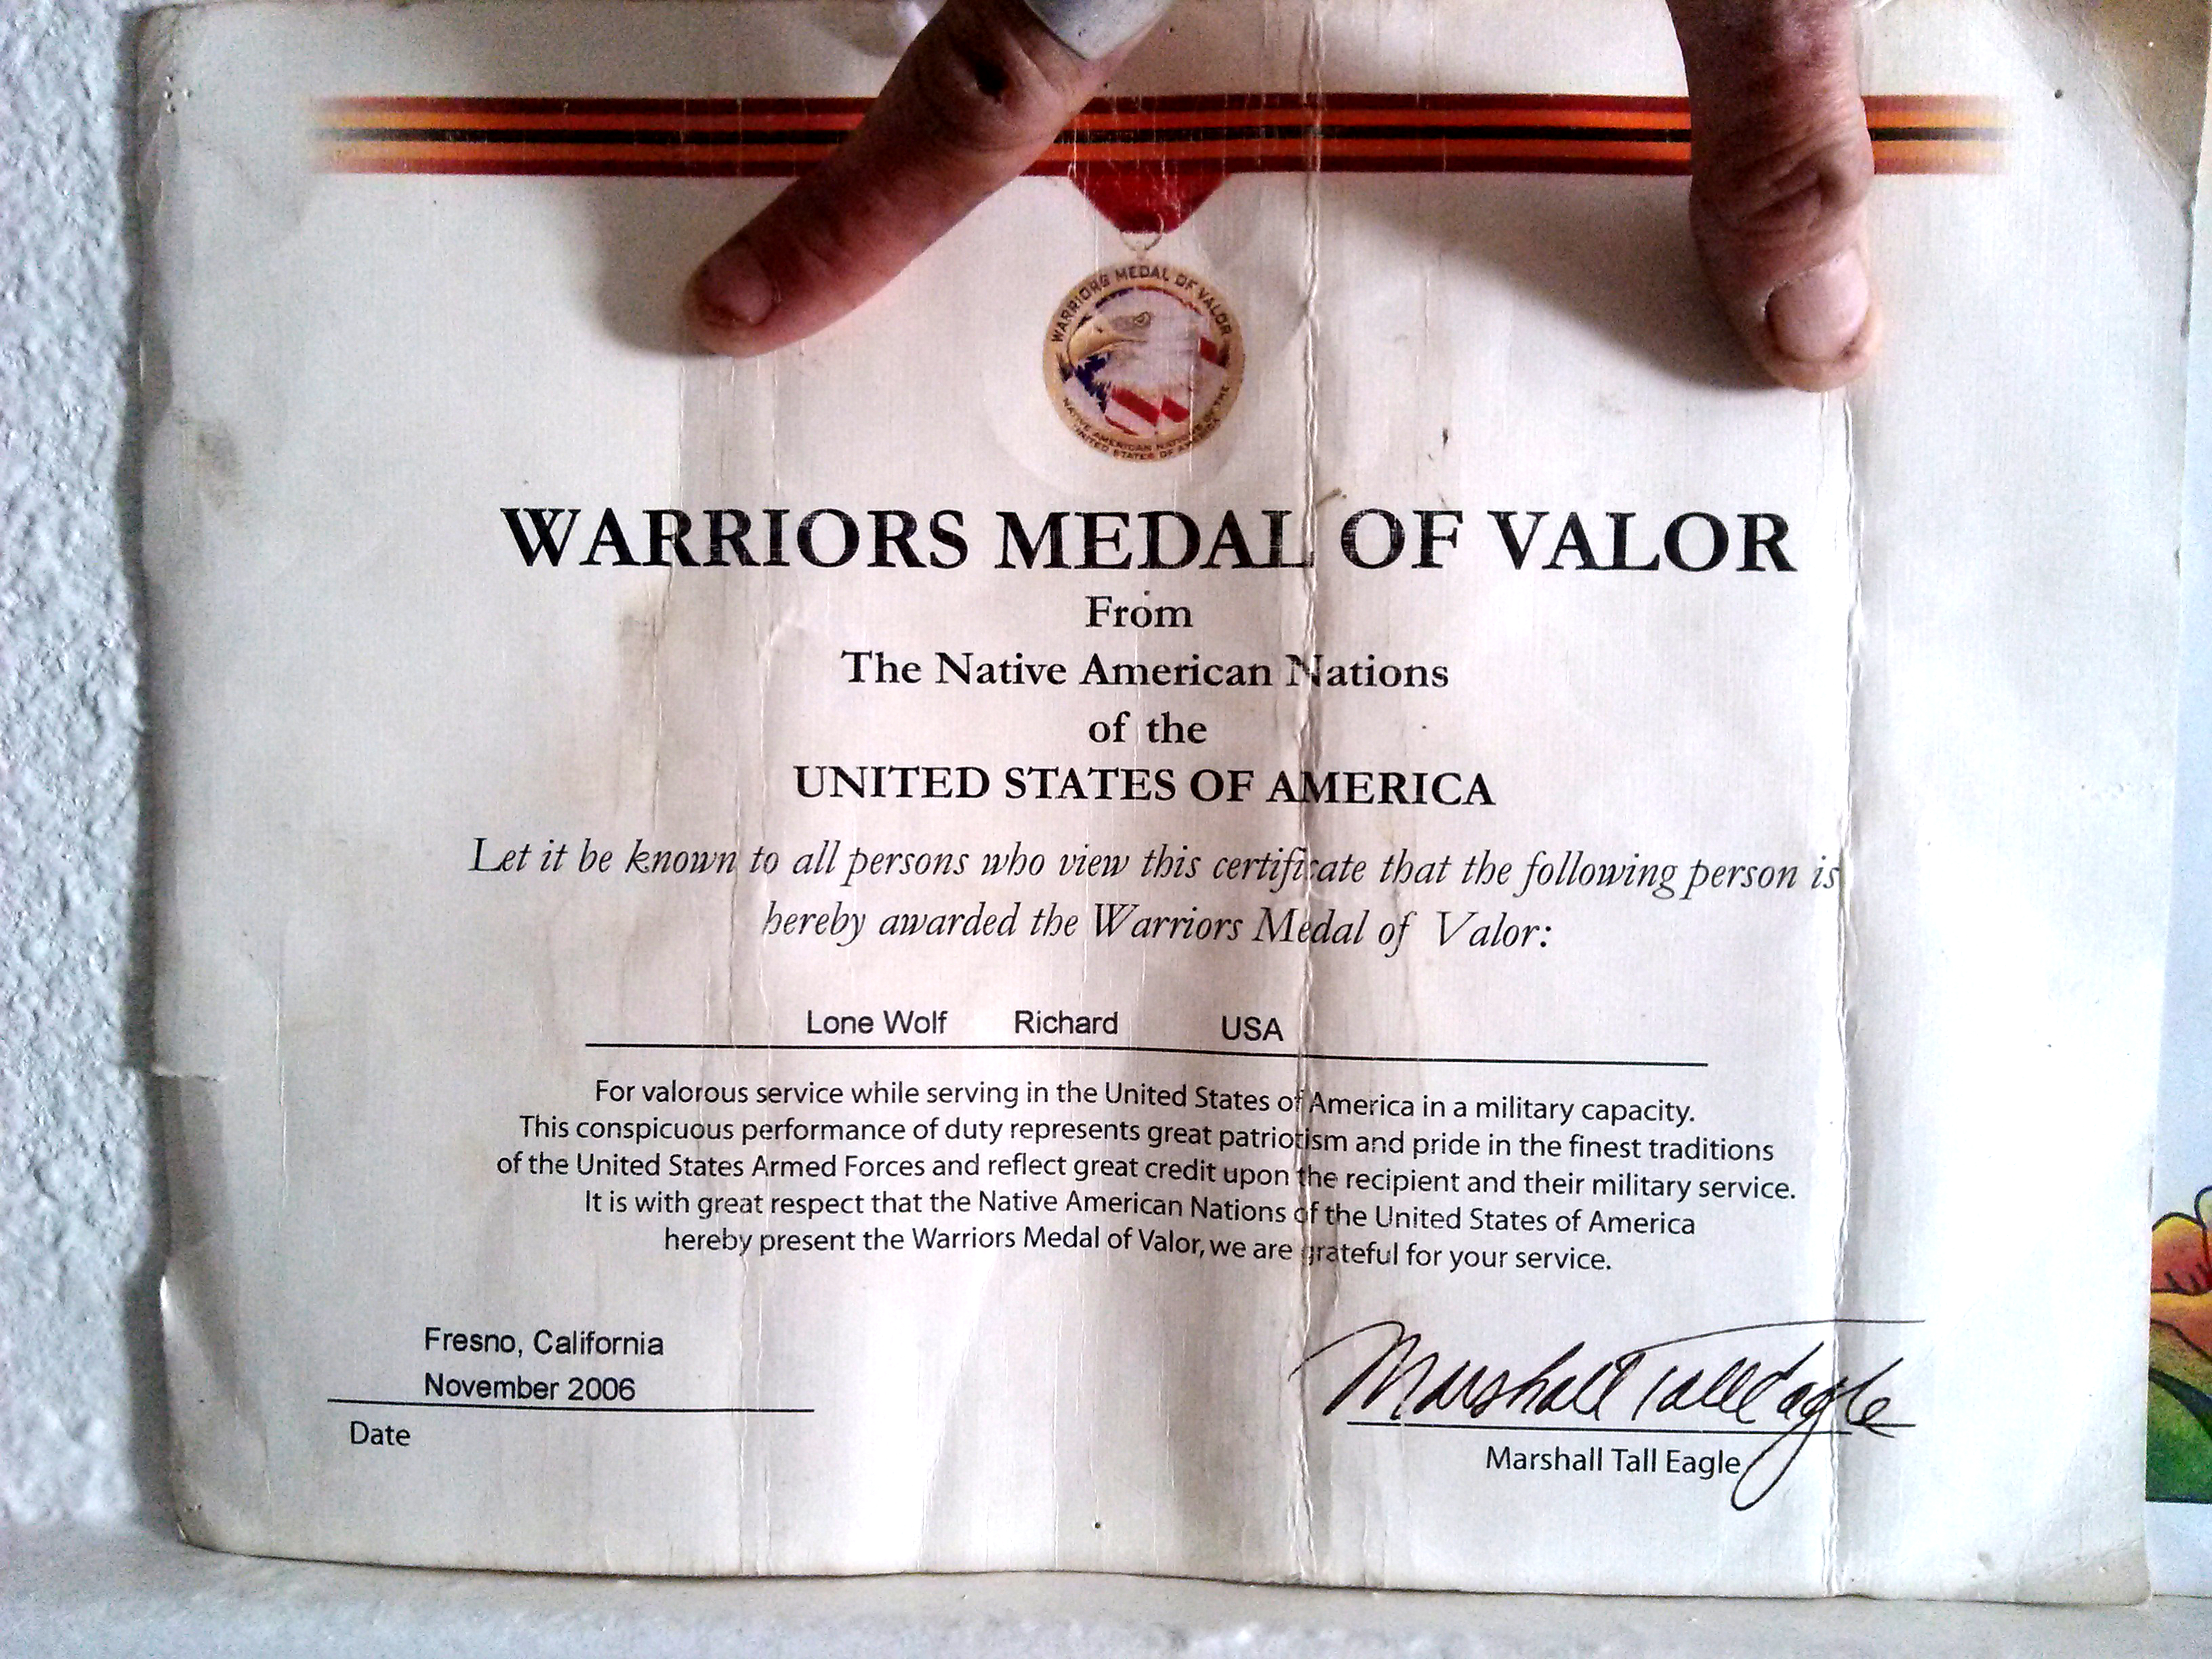 Warrior's Medal of Honor